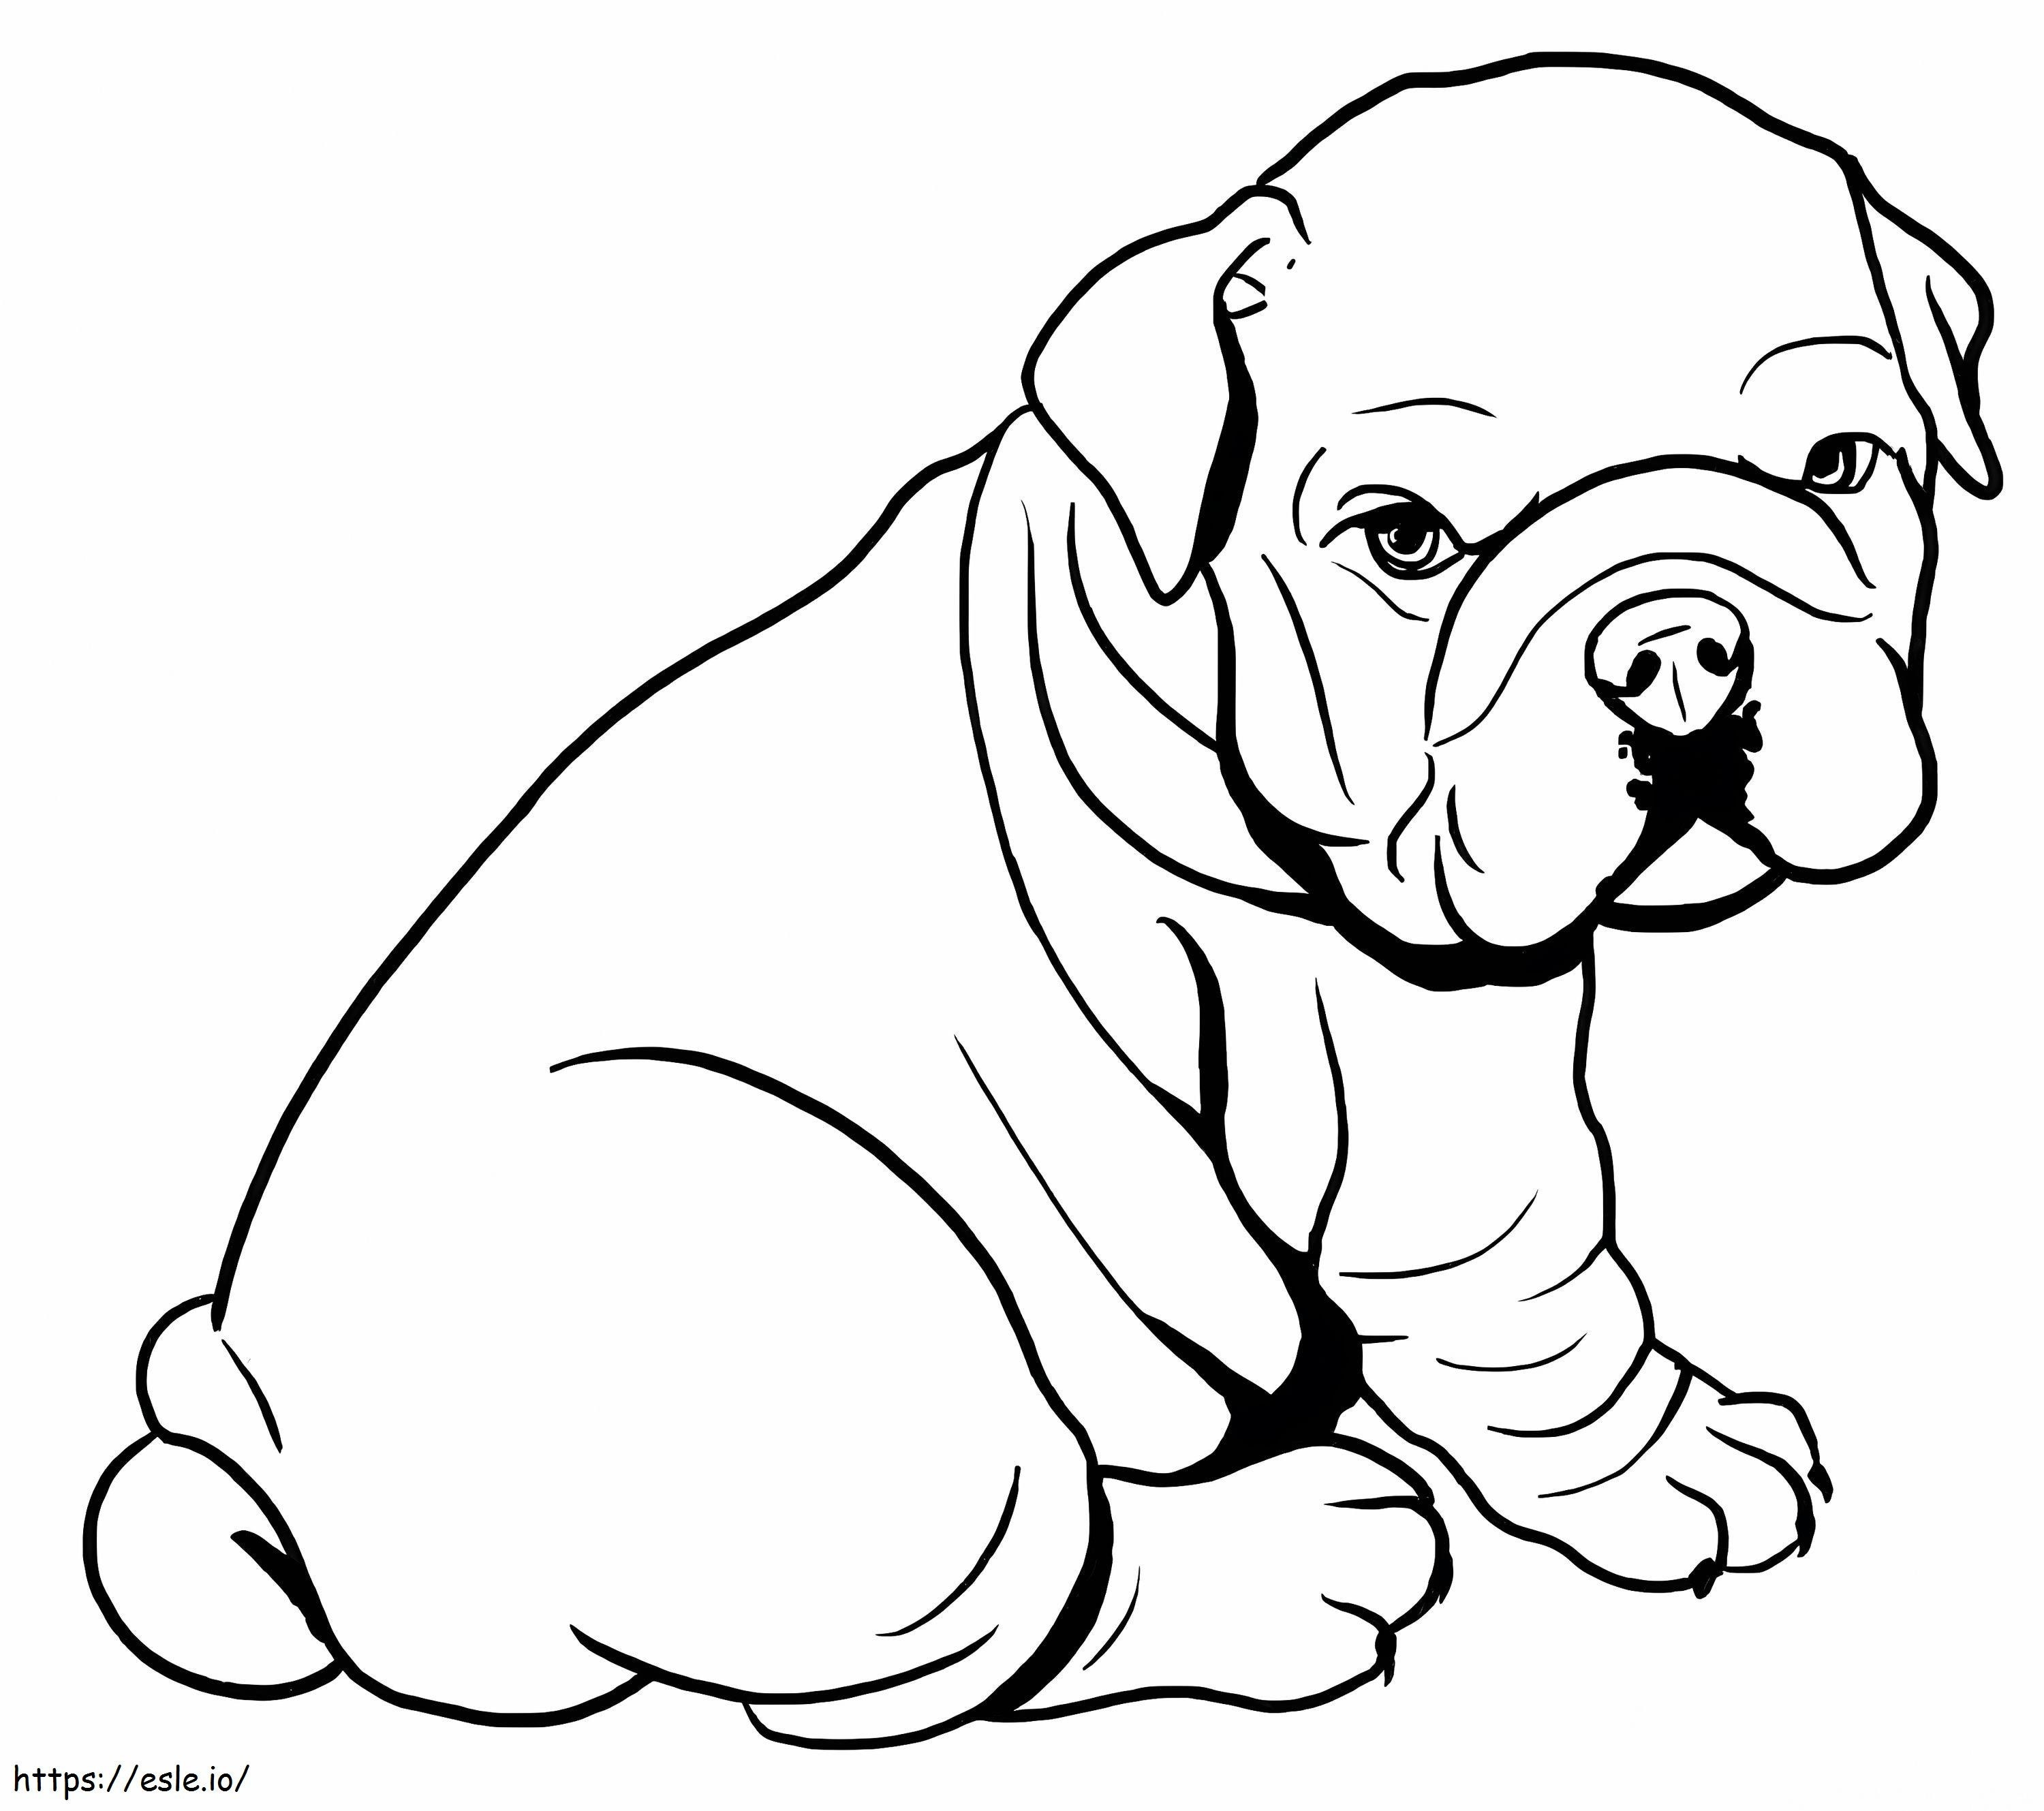 Baby Pitbull coloring page